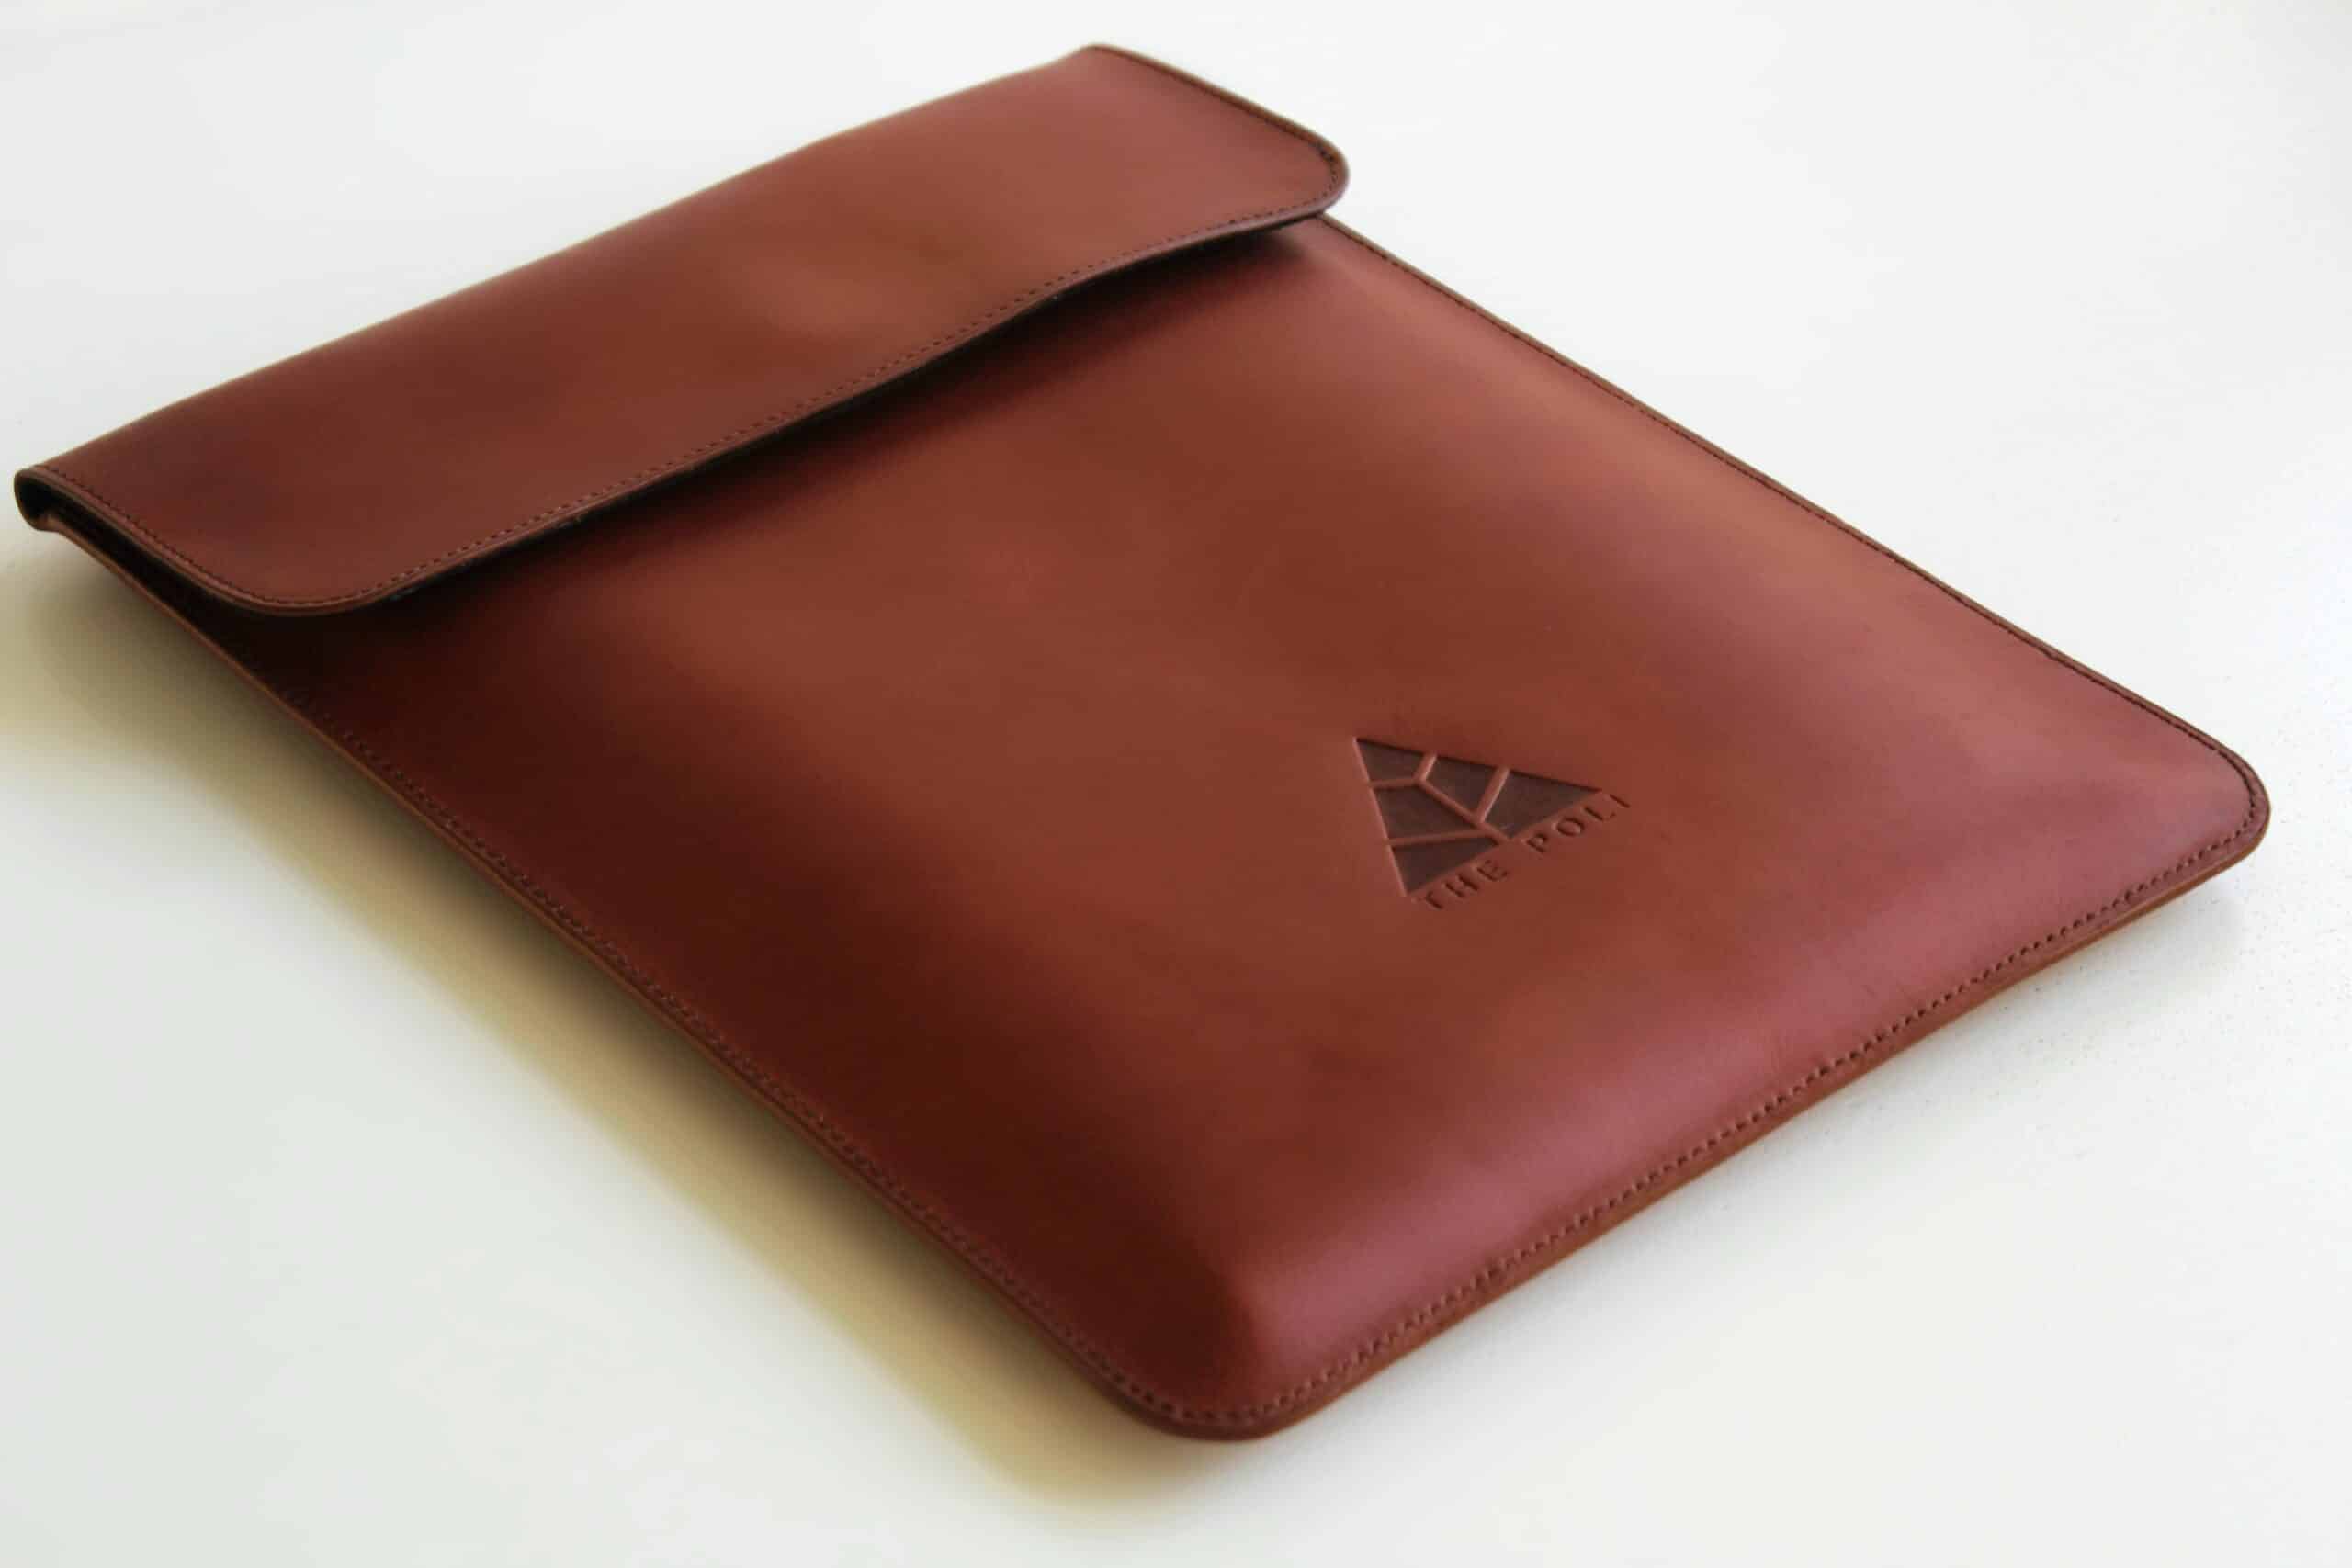 The Leather Laptop Sleeve